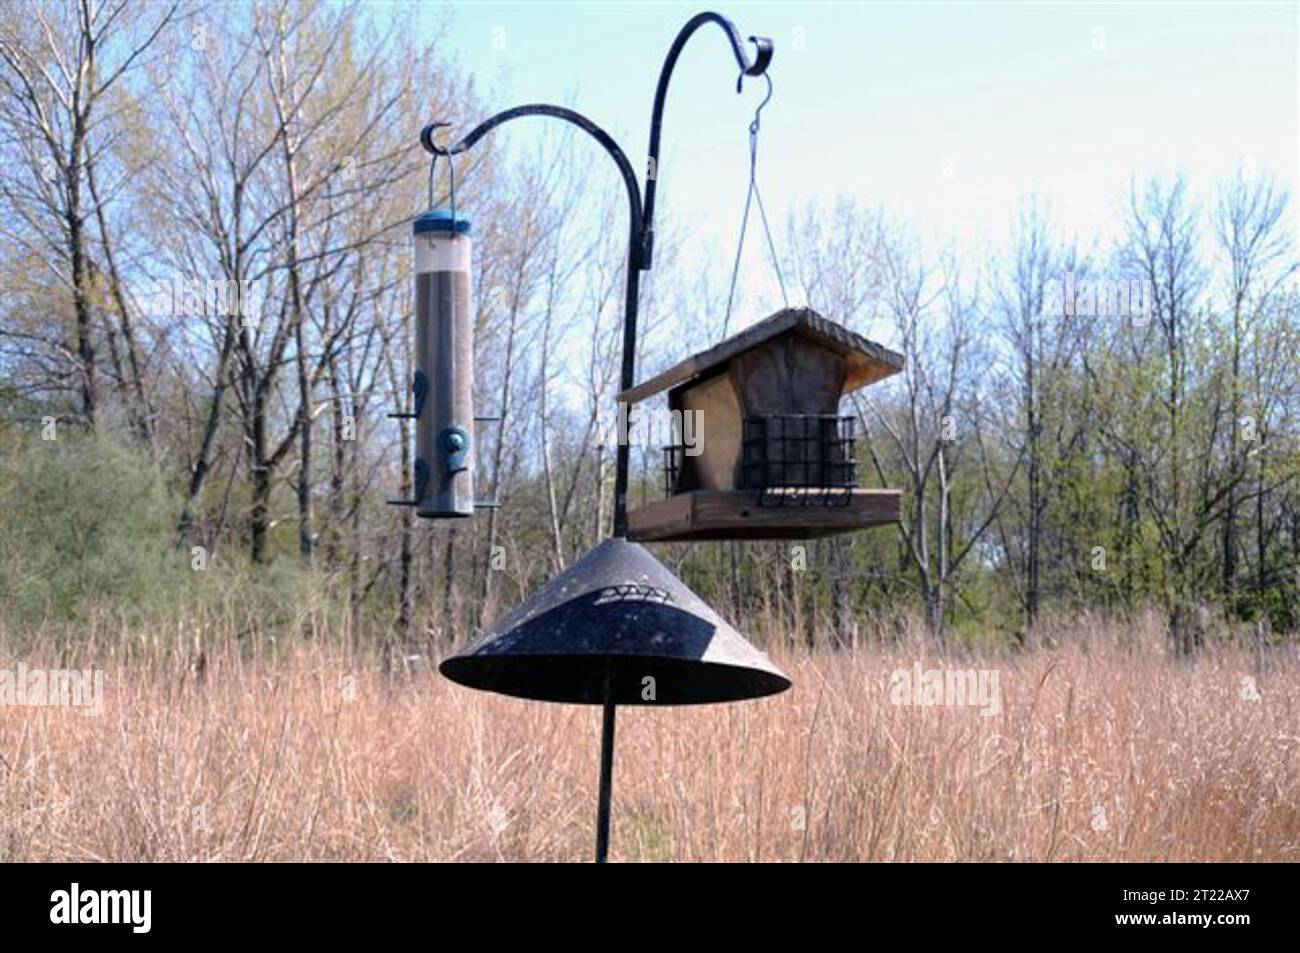 A birdfeeder is pictured at the John Heinz National Wildlife Refuge at Tinicum. Subjects: Birds; Wildlife refuges. Location: Pennsylvania. Fish and Wildlife Service Site: JOHN HEINZ NATIONAL WILDLIFE REFUGE AT TINICUM.  . 1998 - 2011. Stock Photo